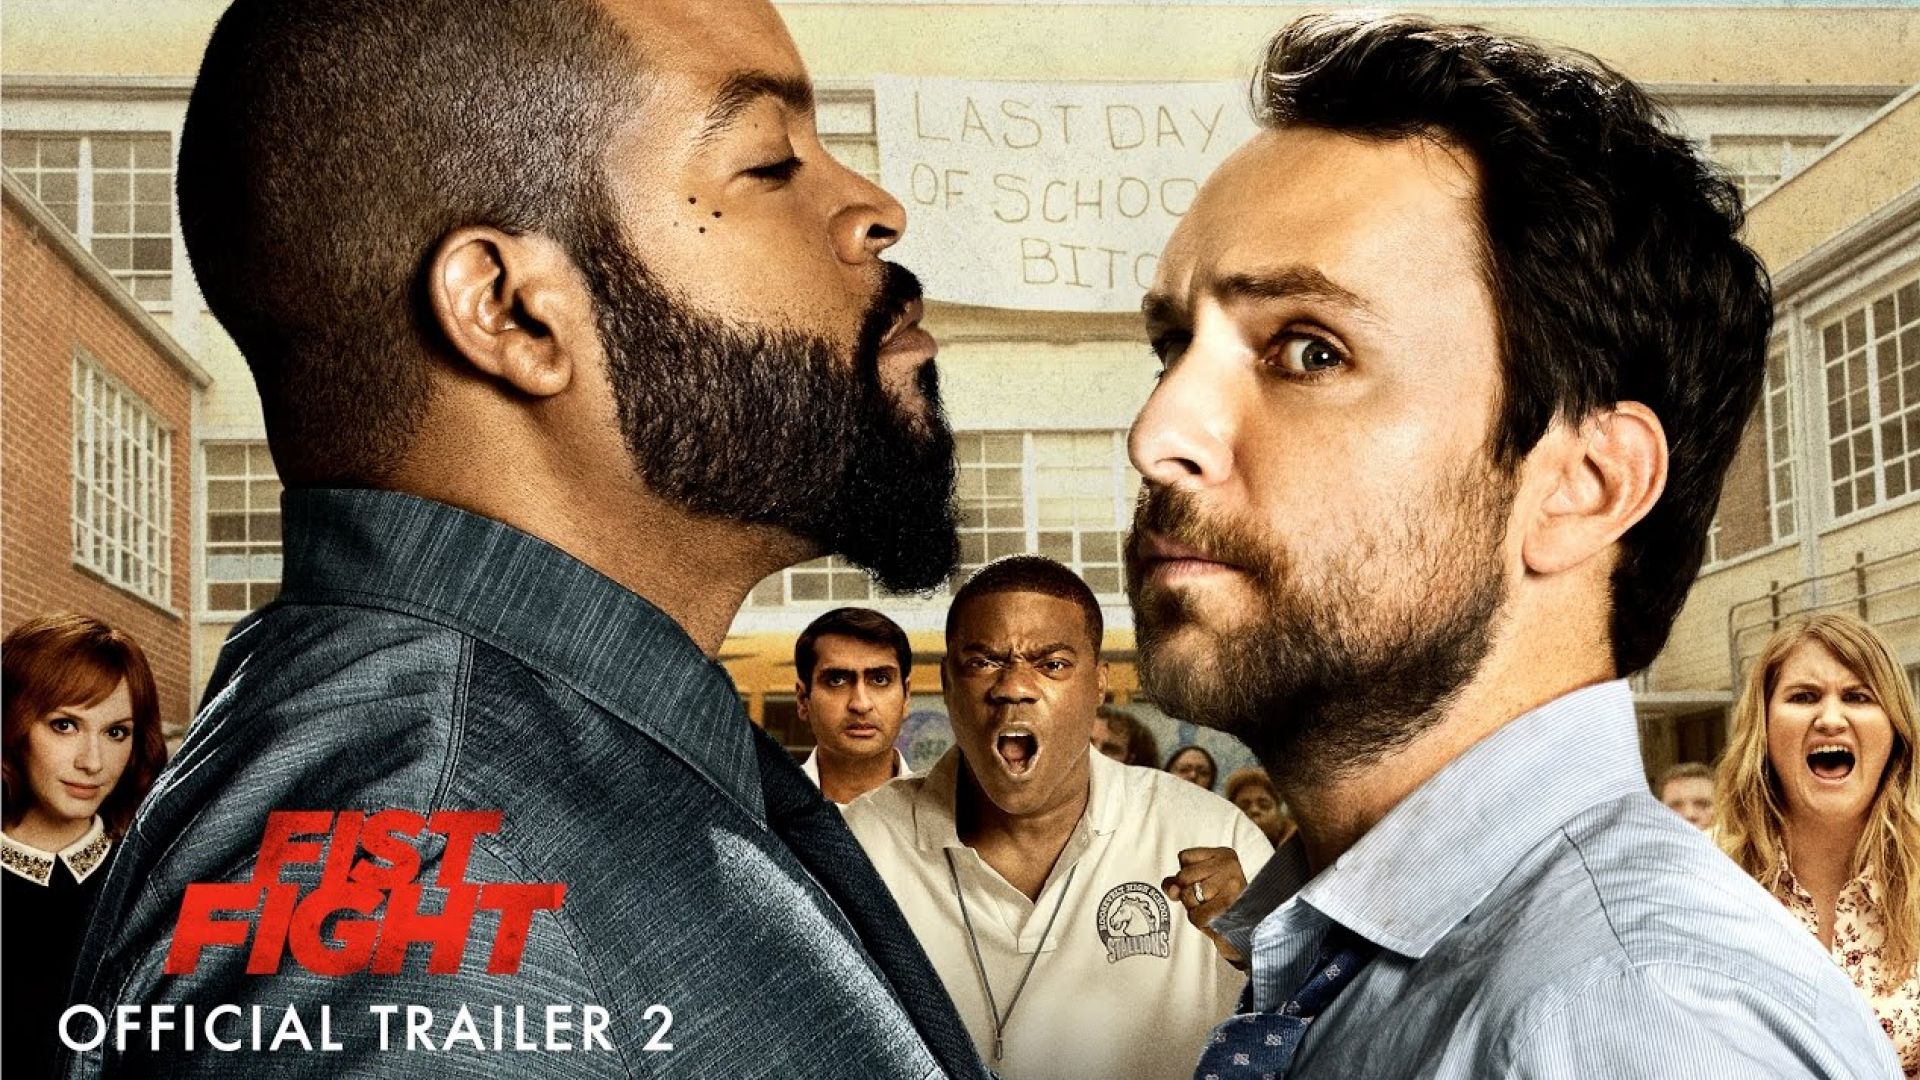 The second trailer for &quot;Fist Fight&quot; starring Ice Cube and Ch